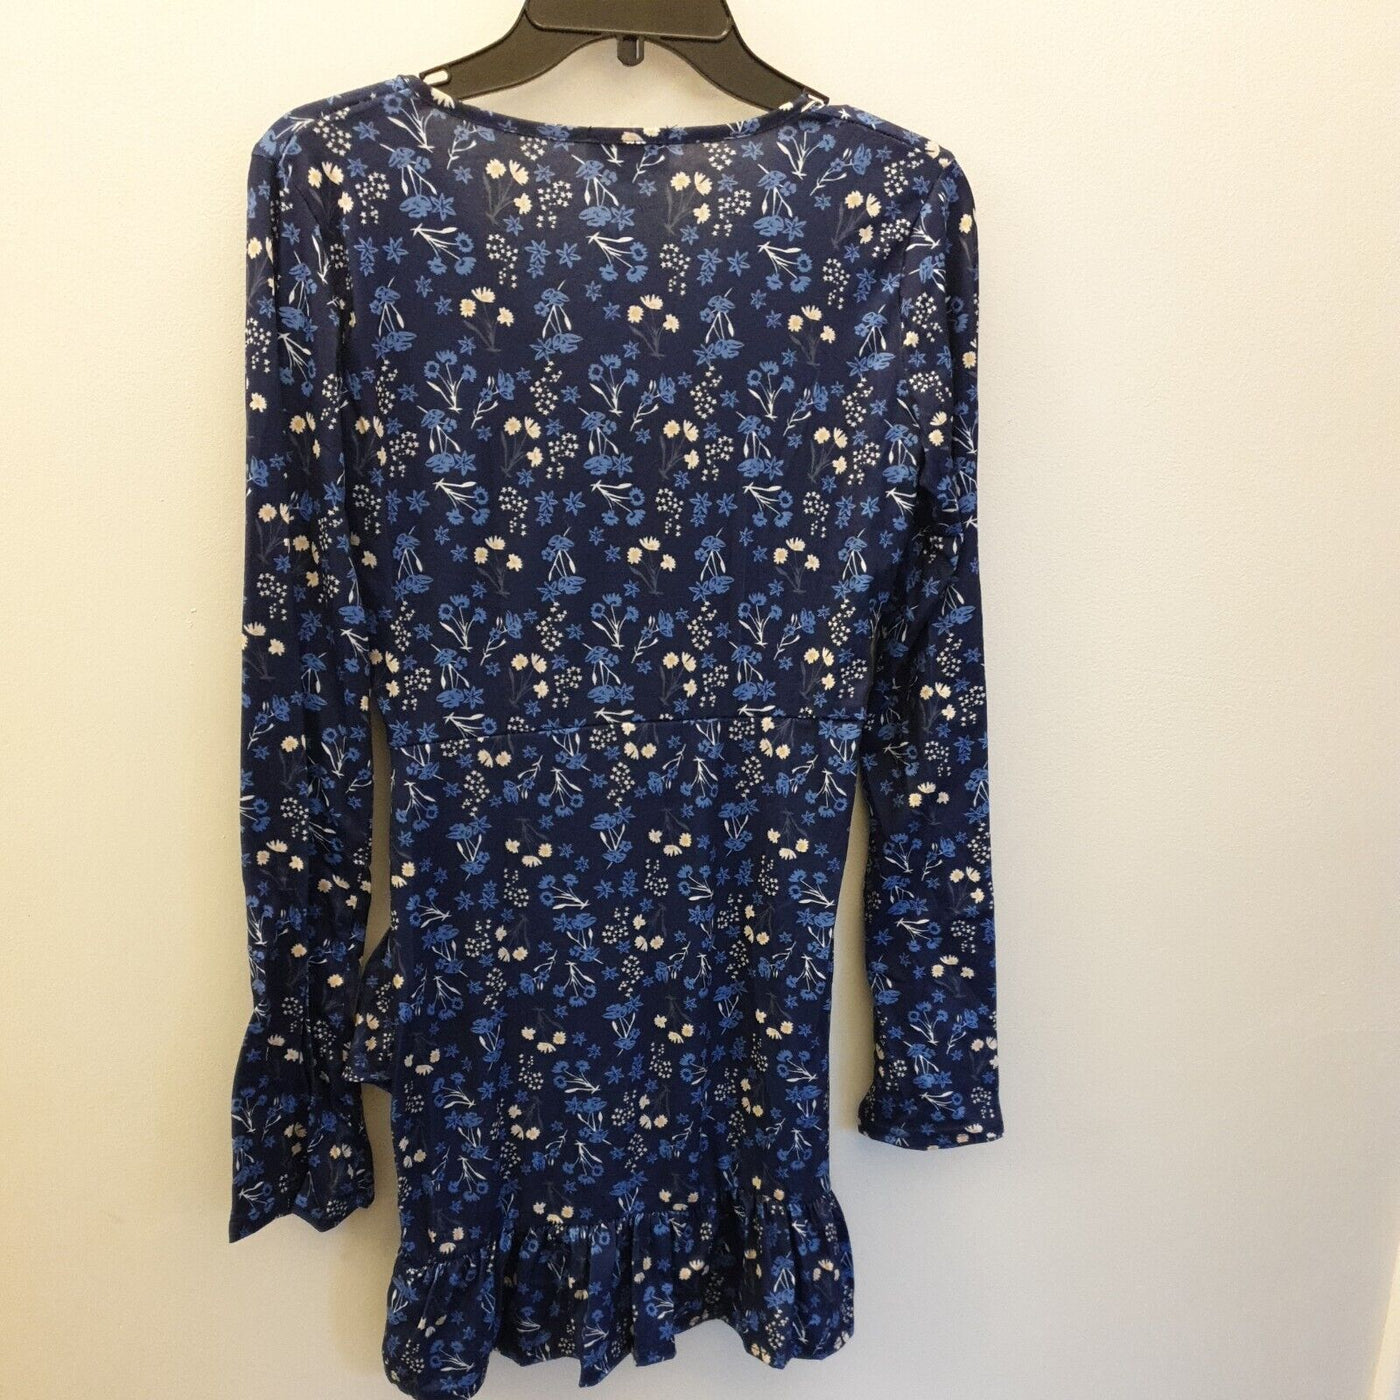 In The Style jac jossa Floral Print Dress Size 8****Ref V110